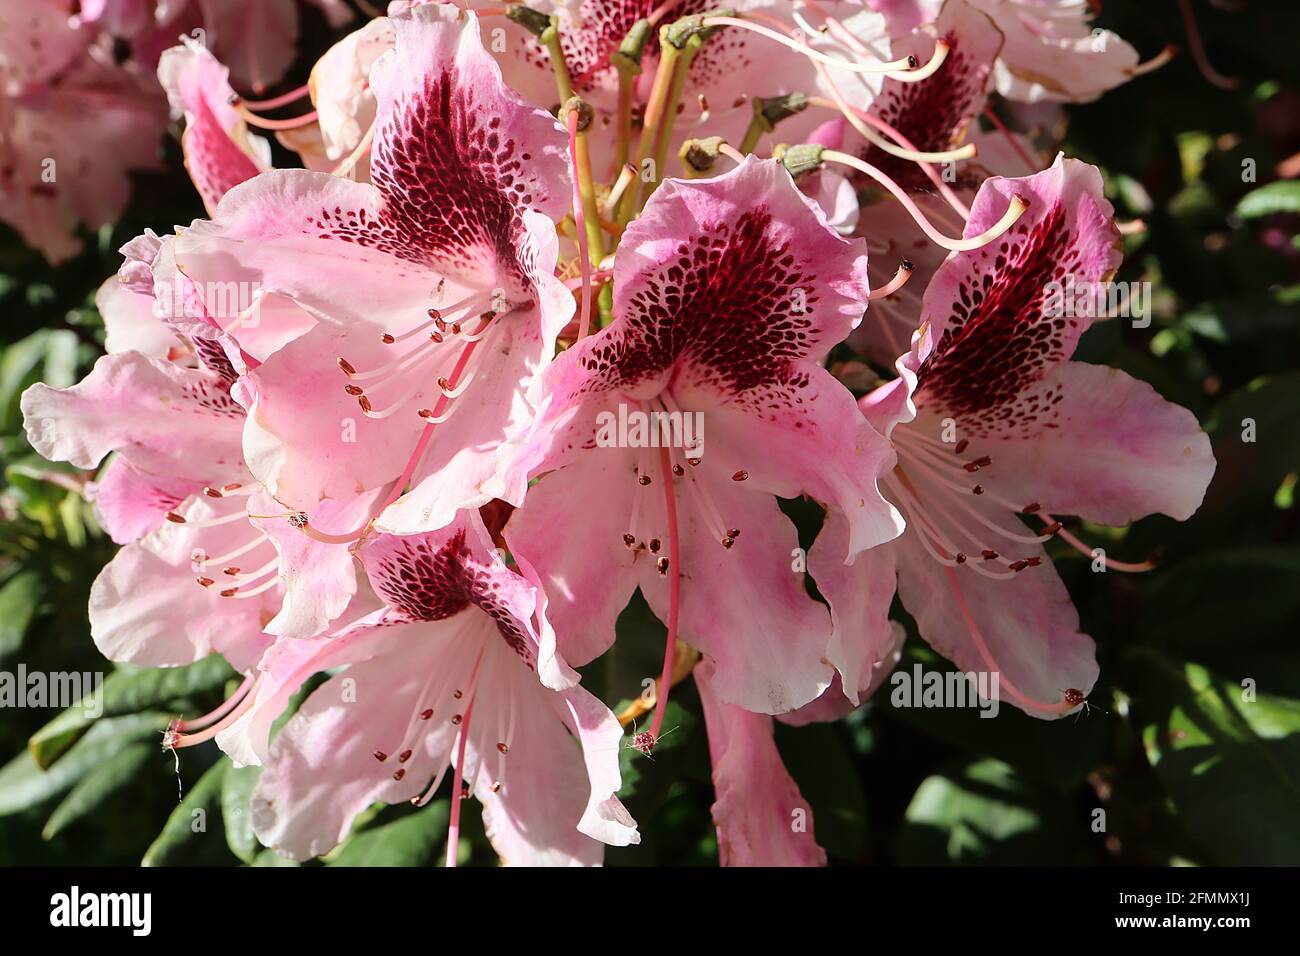 Rhododendron ‘Kokardia’ Lavender pink funnel-shaped flowers with dense dark brown blotch,  May, England, UK Stock Photo